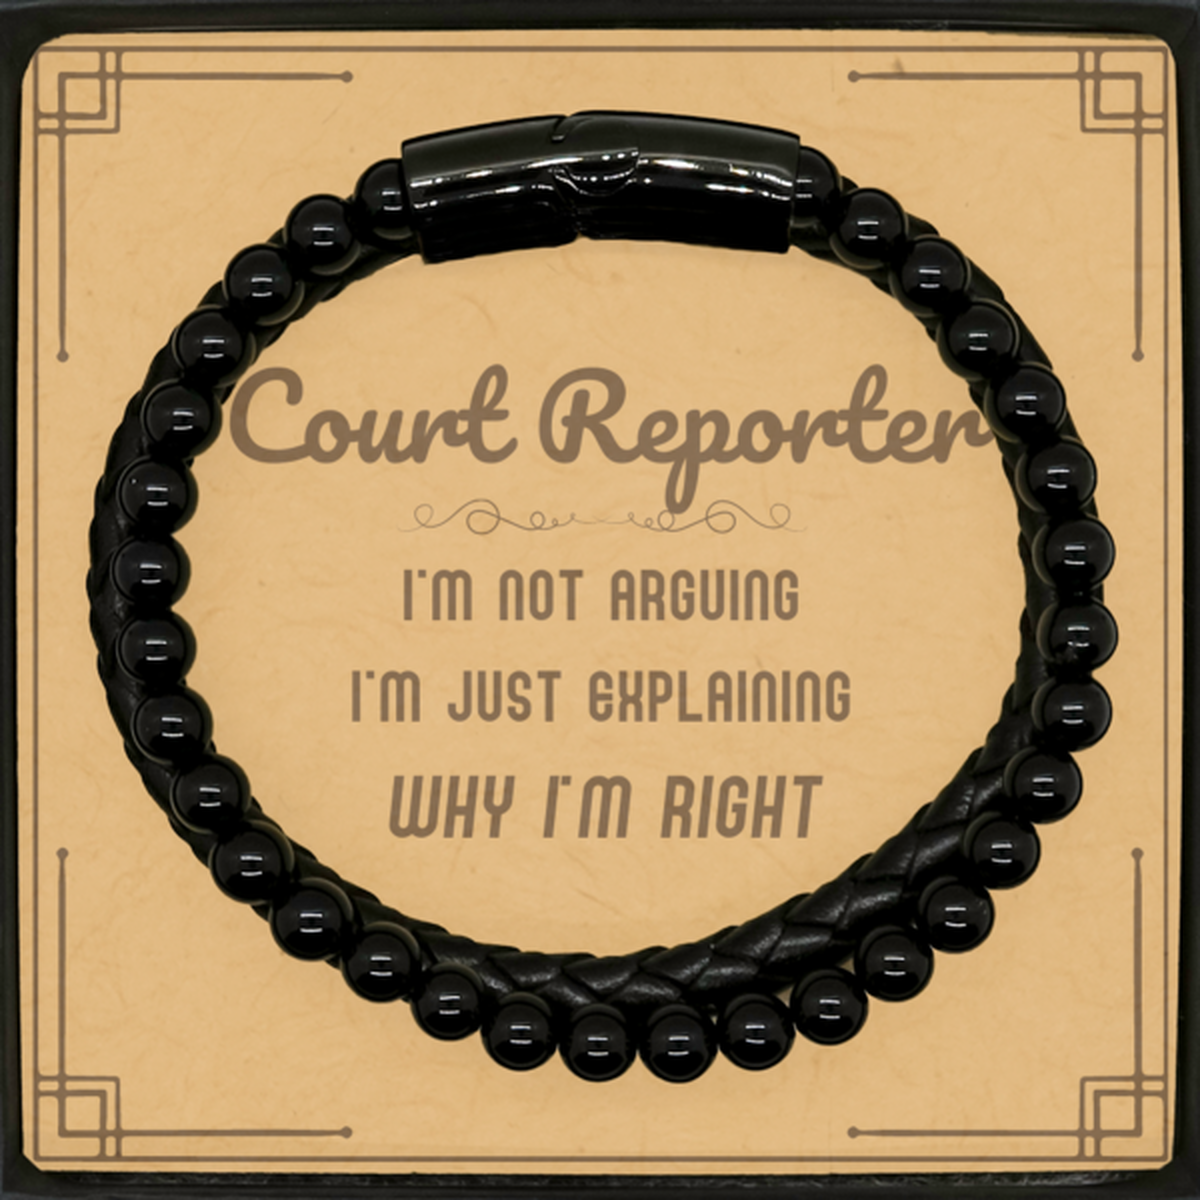 Court Reporter I'm not Arguing. I'm Just Explaining Why I'm RIGHT Stone Leather Bracelets, Funny Saying Quote Court Reporter Gifts For Court Reporter Message Card Graduation Birthday Christmas Gifts for Men Women Coworker